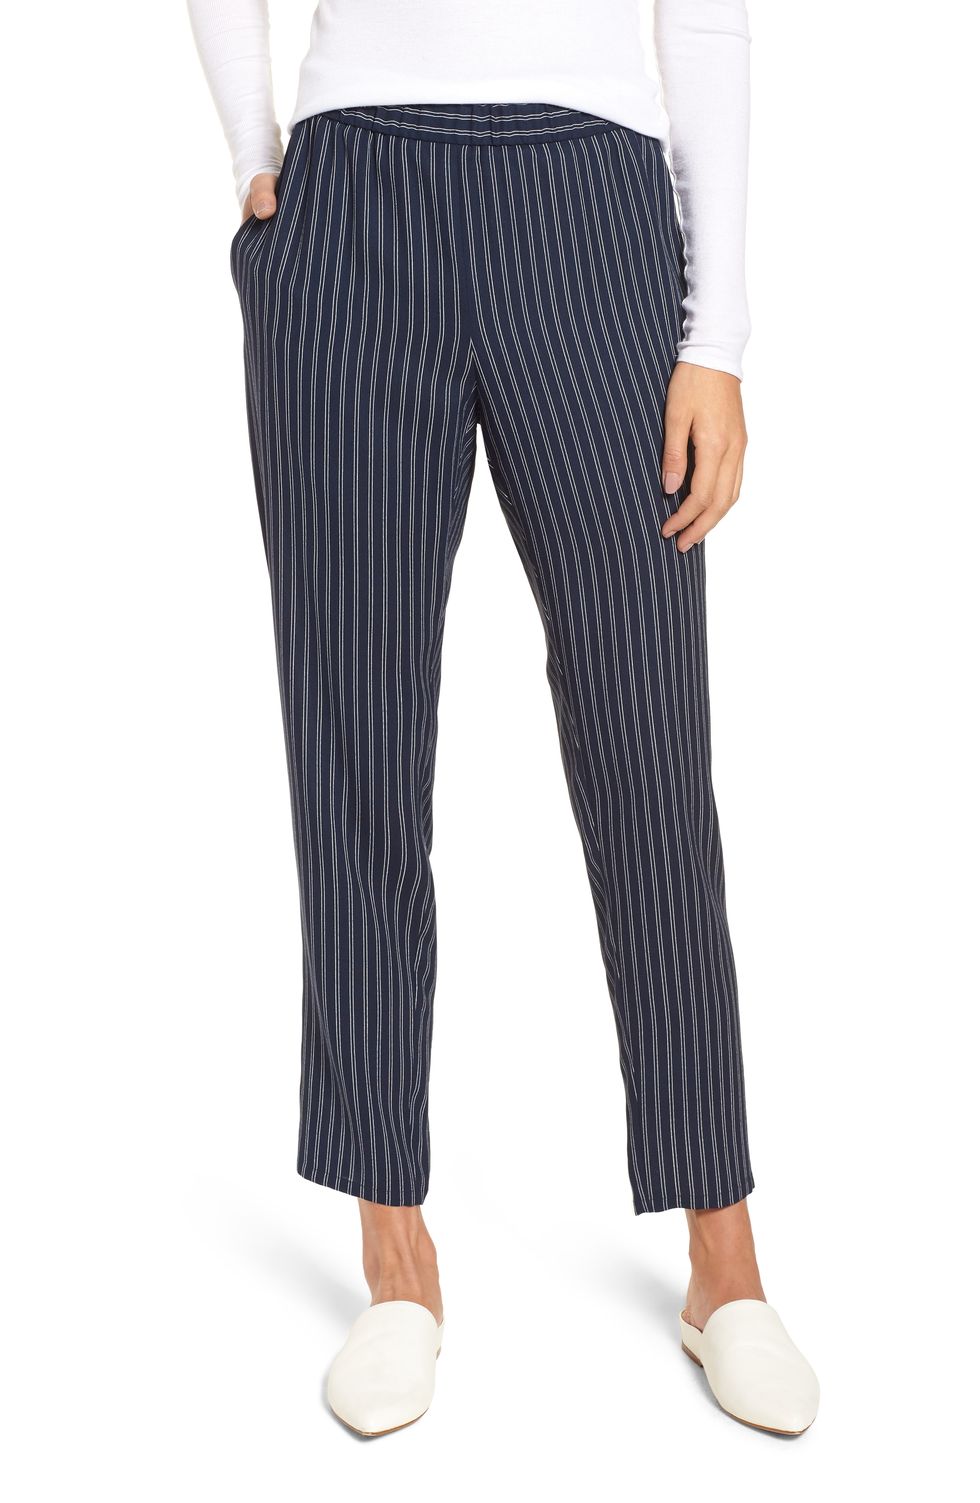 Striped Pants to Wear Both In and Out of the Office 